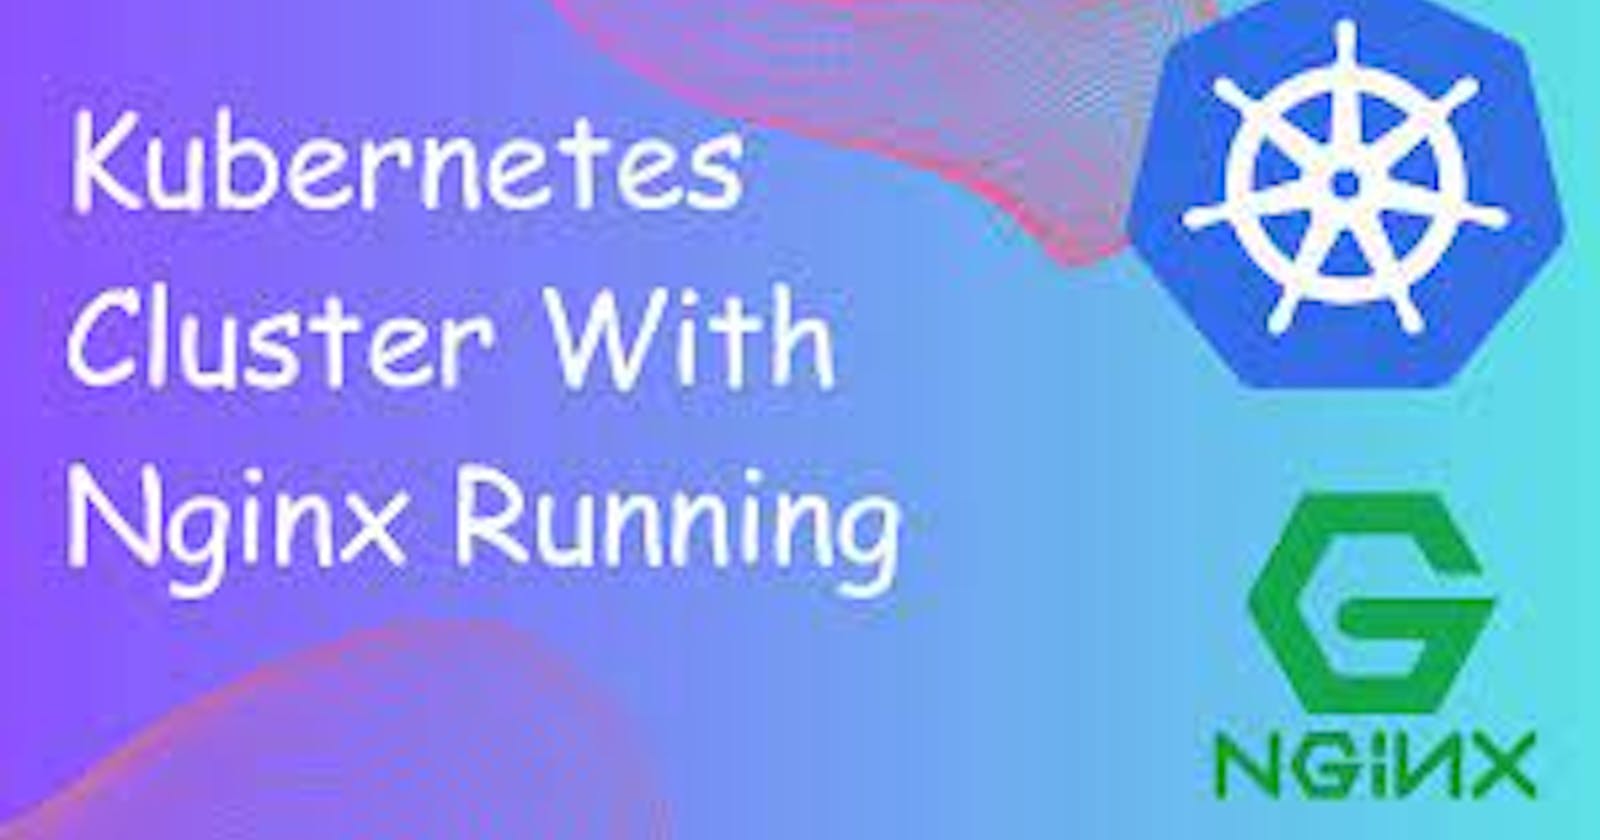 Launching your First Kubernetes Cluster with Nginx running